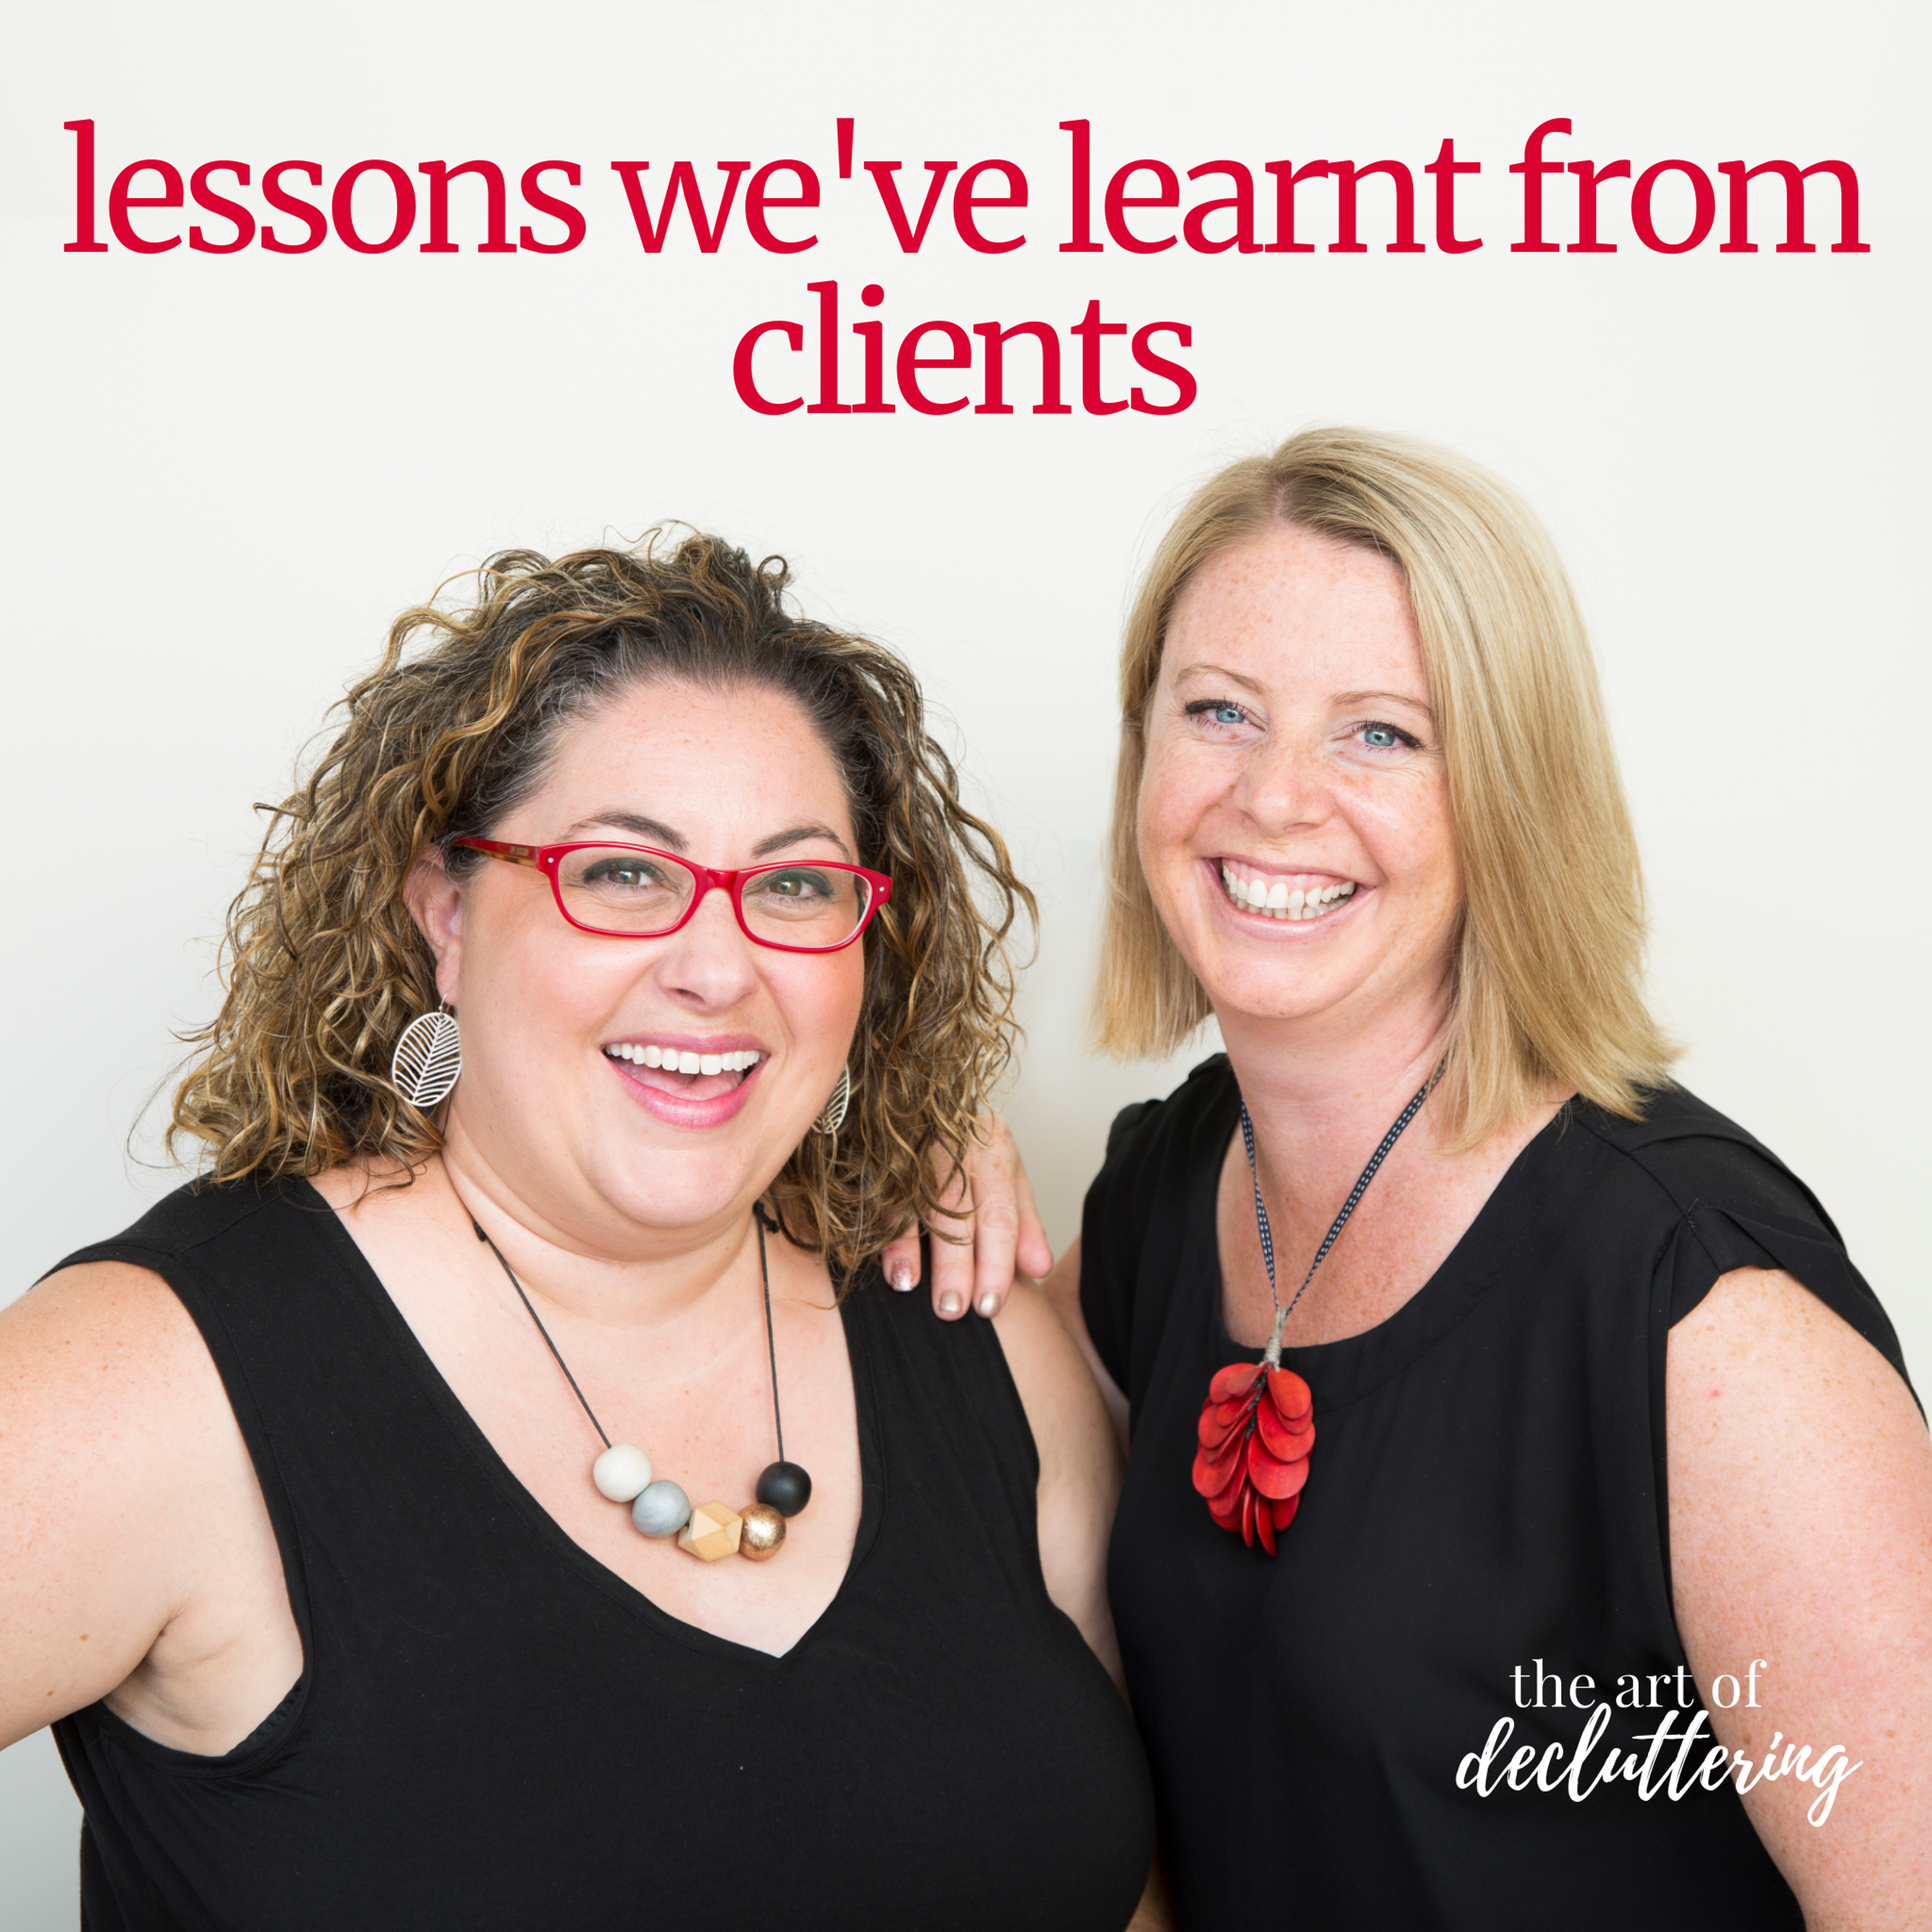 Lessons We've Learnt From Clients